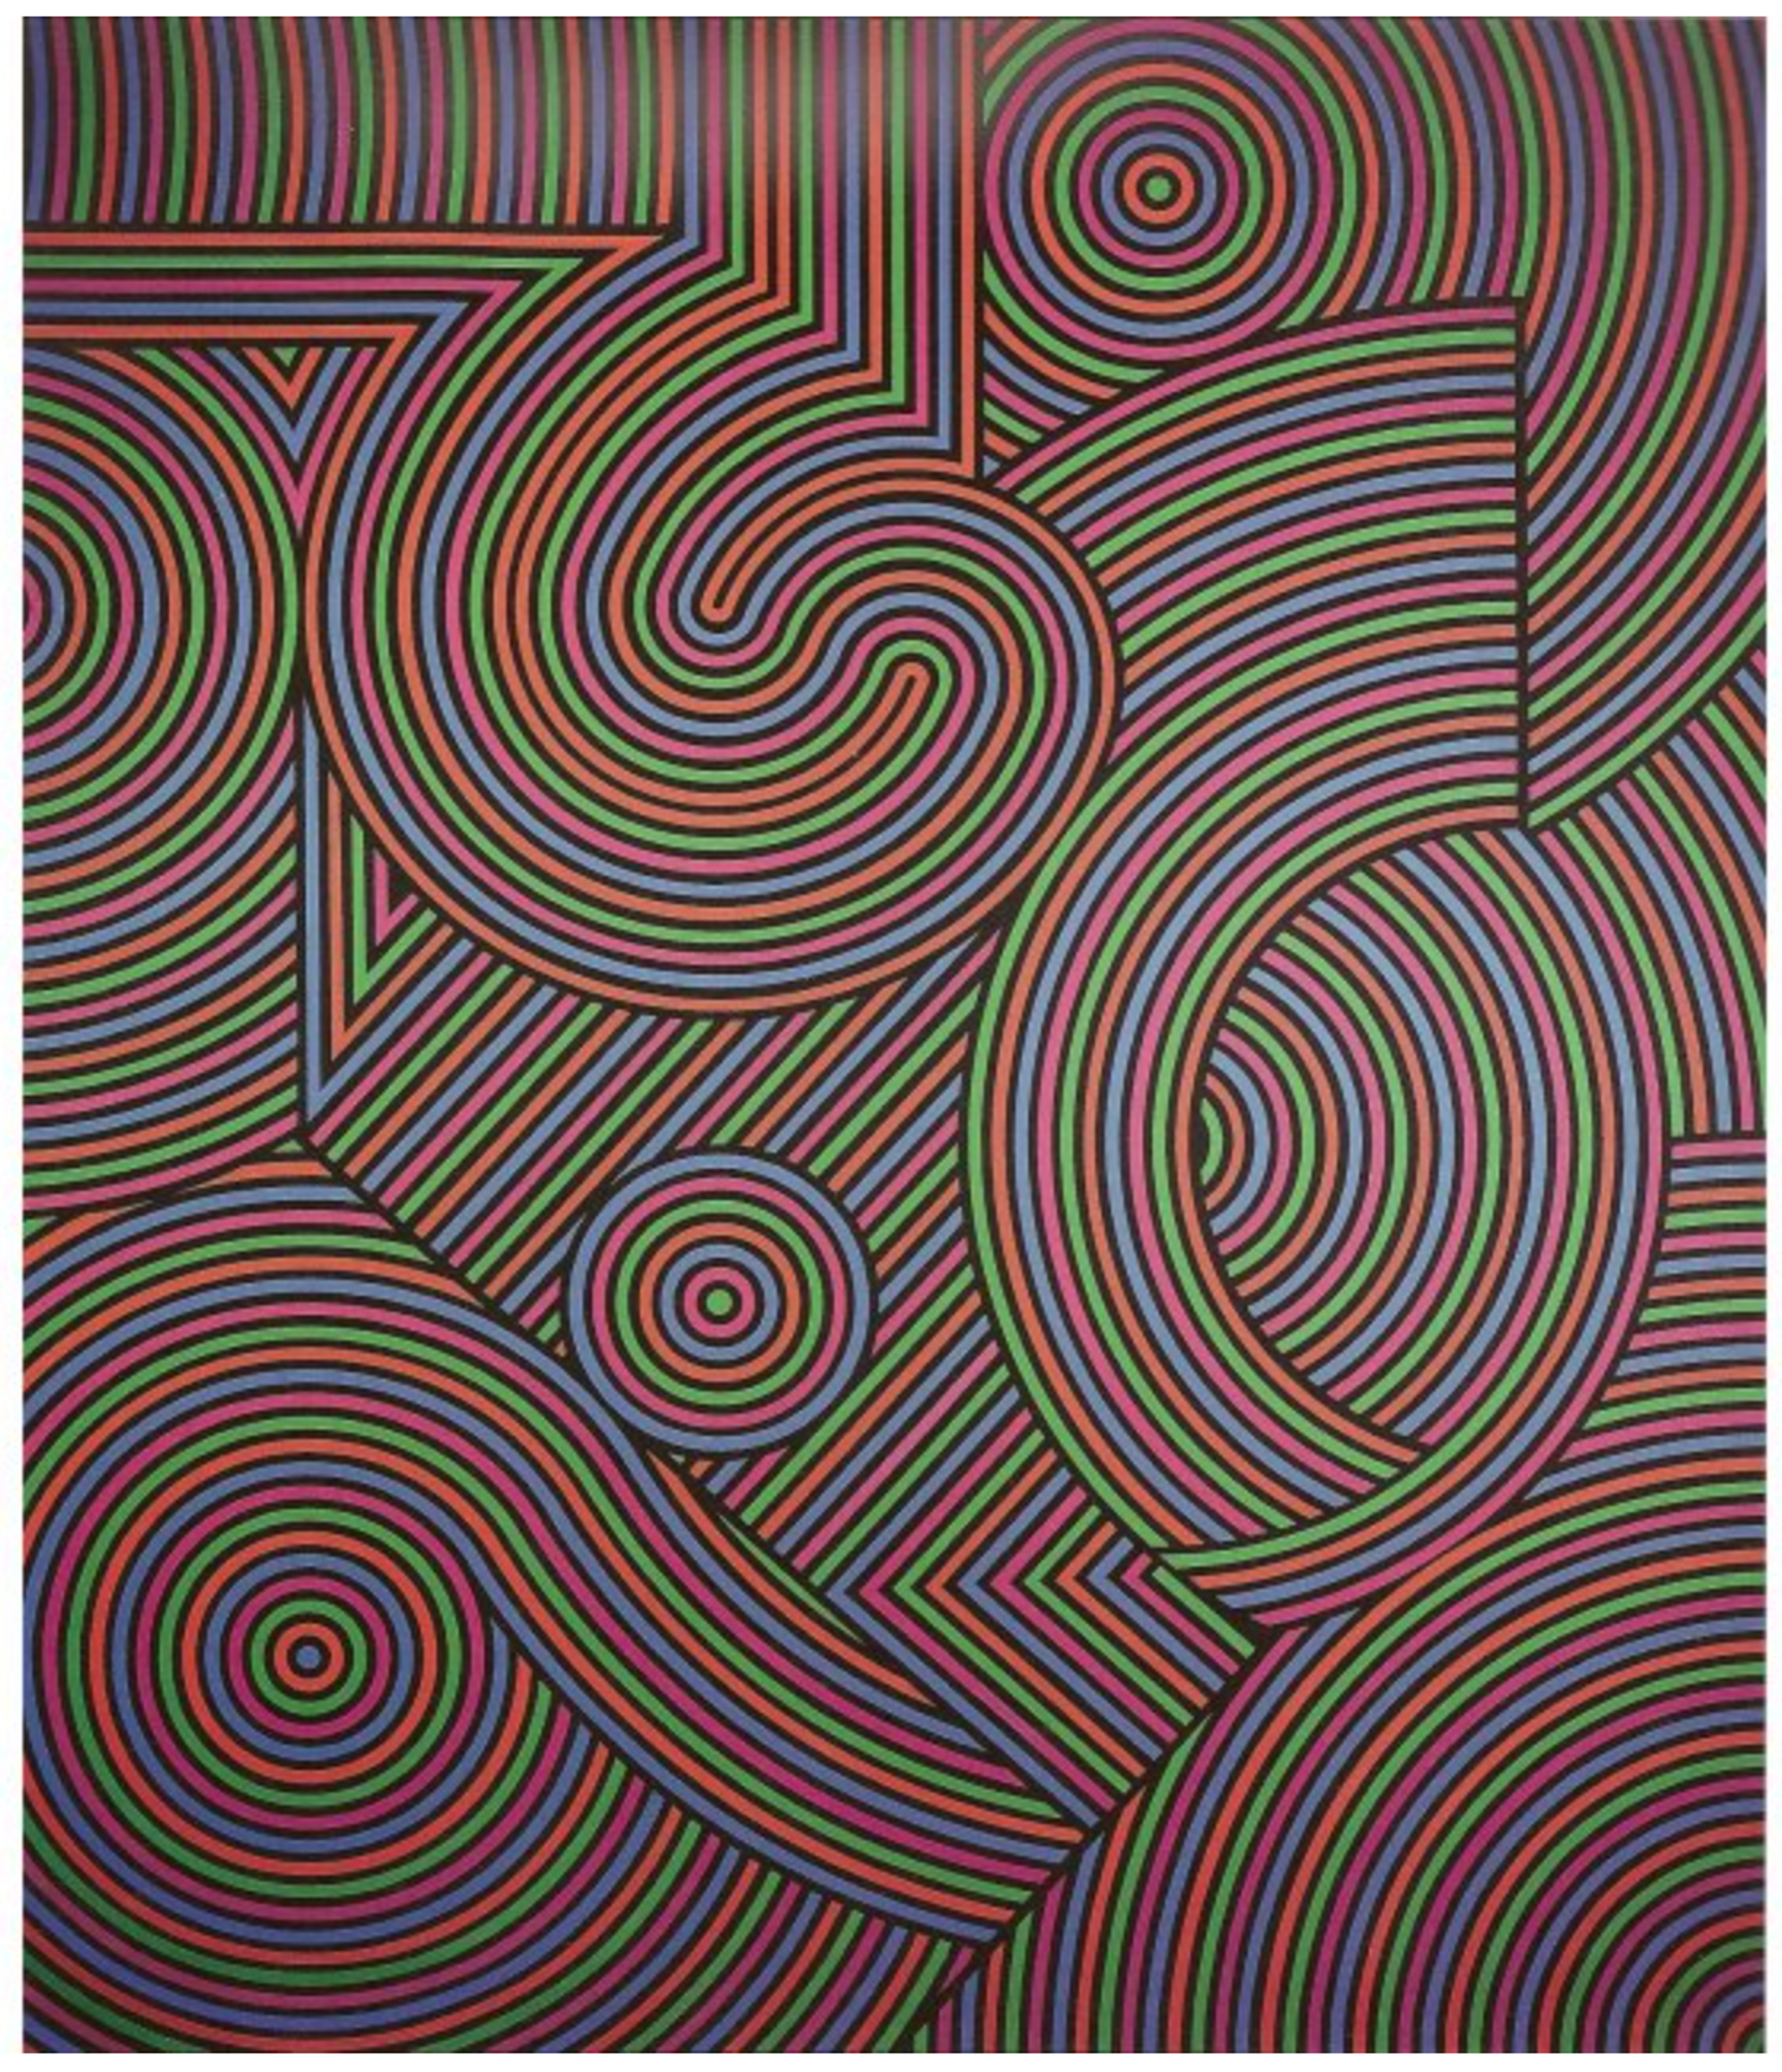 A grometric abstract artwork featuring puzzeled geometric forms made of straight and curved lines in repeating hues of red, black, purple, and green.